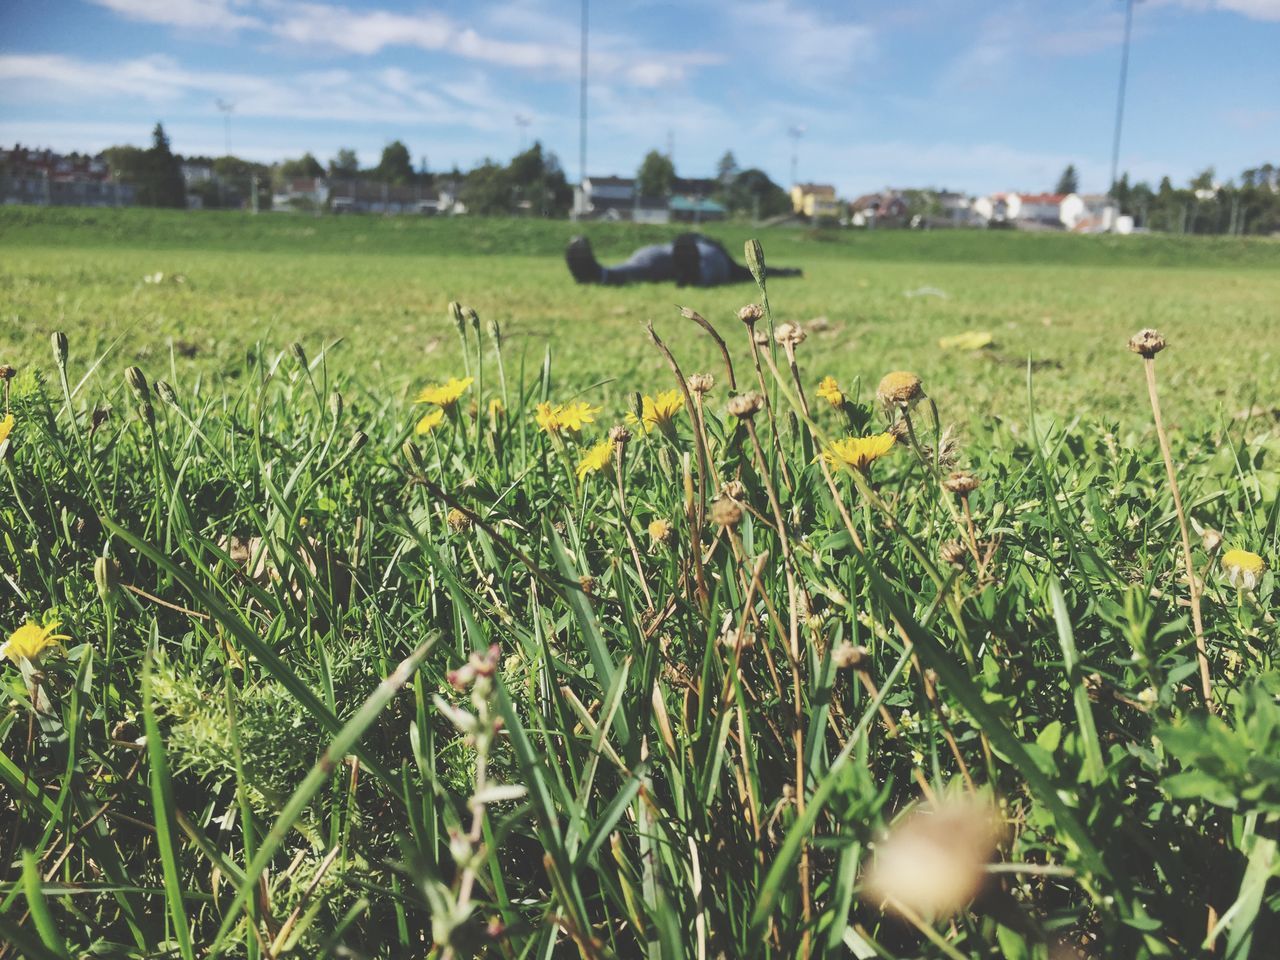 plant, field, land, growth, grass, green color, nature, landscape, environment, beauty in nature, no people, day, tranquility, agriculture, selective focus, sky, scenics - nature, tranquil scene, focus on foreground, outdoors, blade of grass